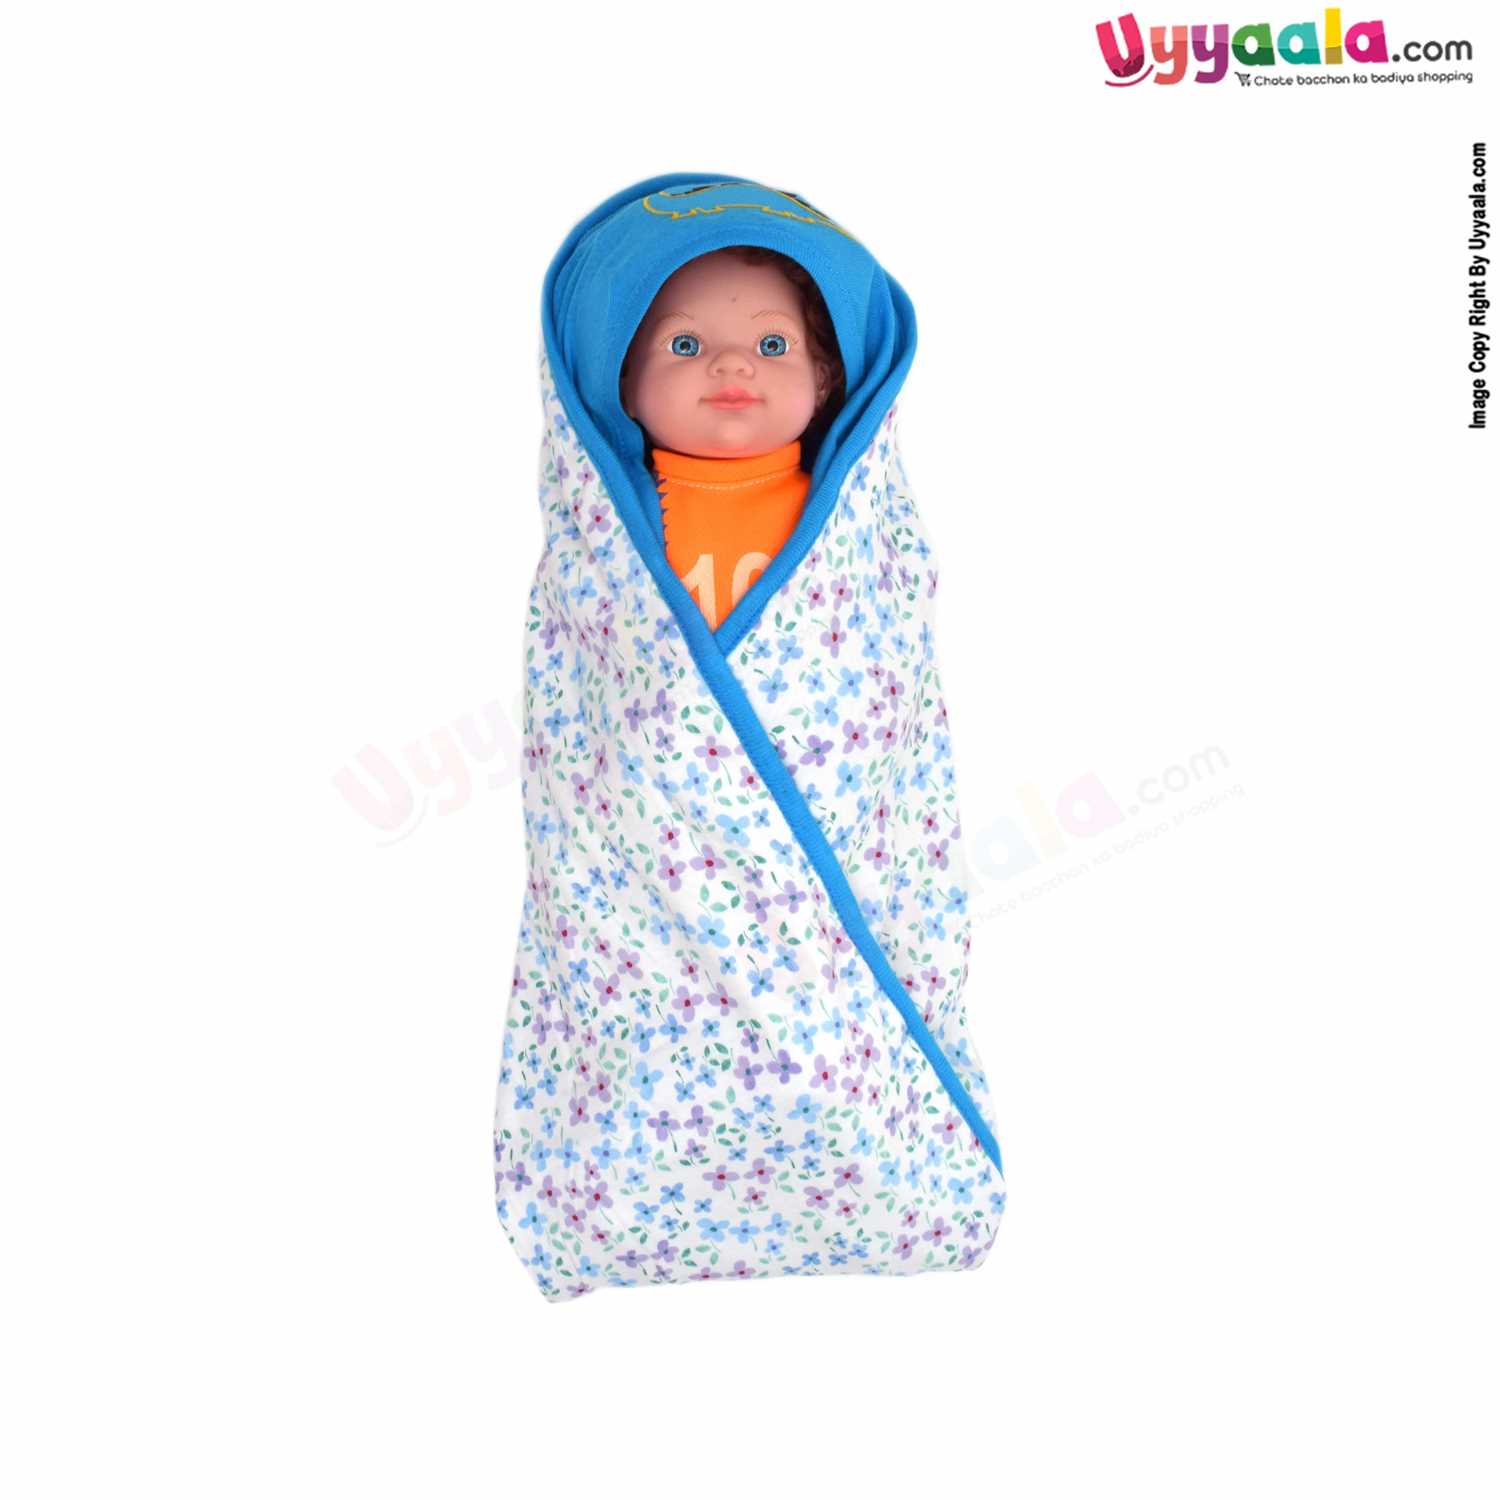 PRECIOUS ONE Baby Hooded Towel Premium Double Layered ,100% Cotton Hosiery with Floral Print 0+m Age, Size (88*72)- White & Blue